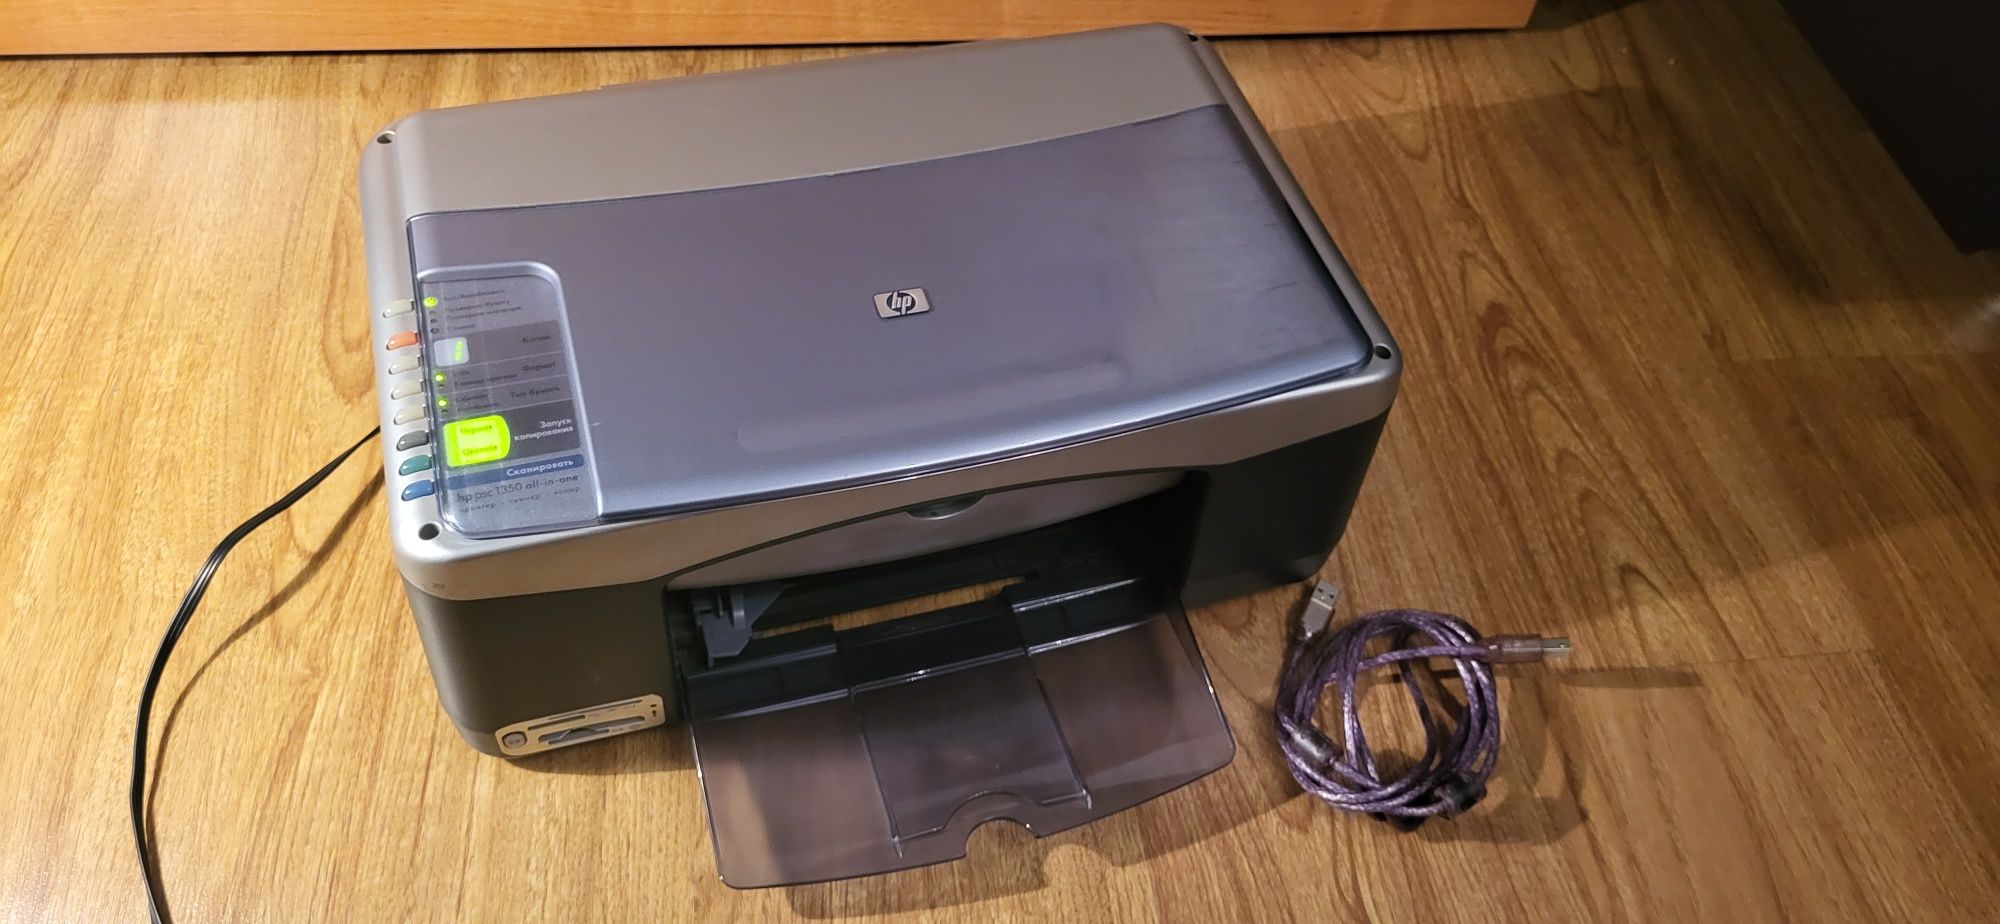 Принтер HP psc 1350 all-in-one